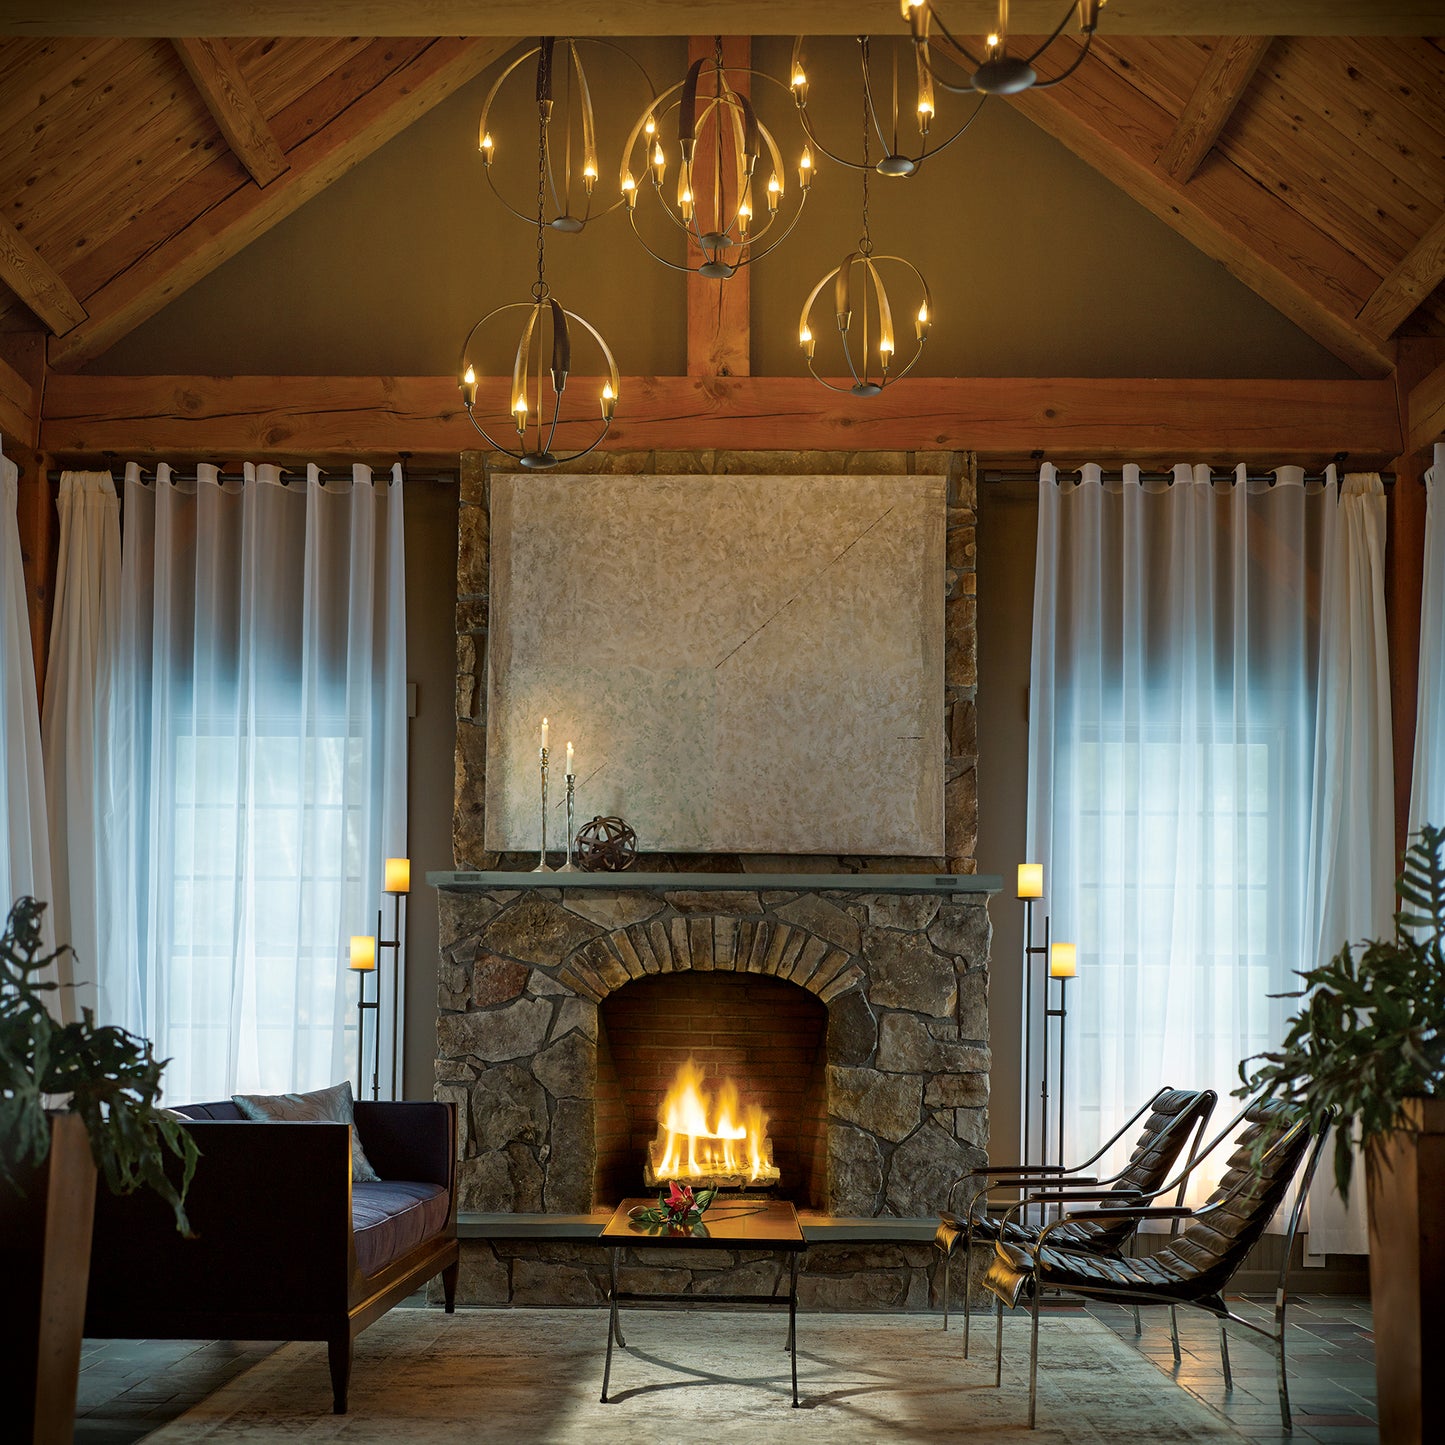 A living room in Vermont with a fireplace illuminated by a Hubbardton Forge Cirque Chandelier.